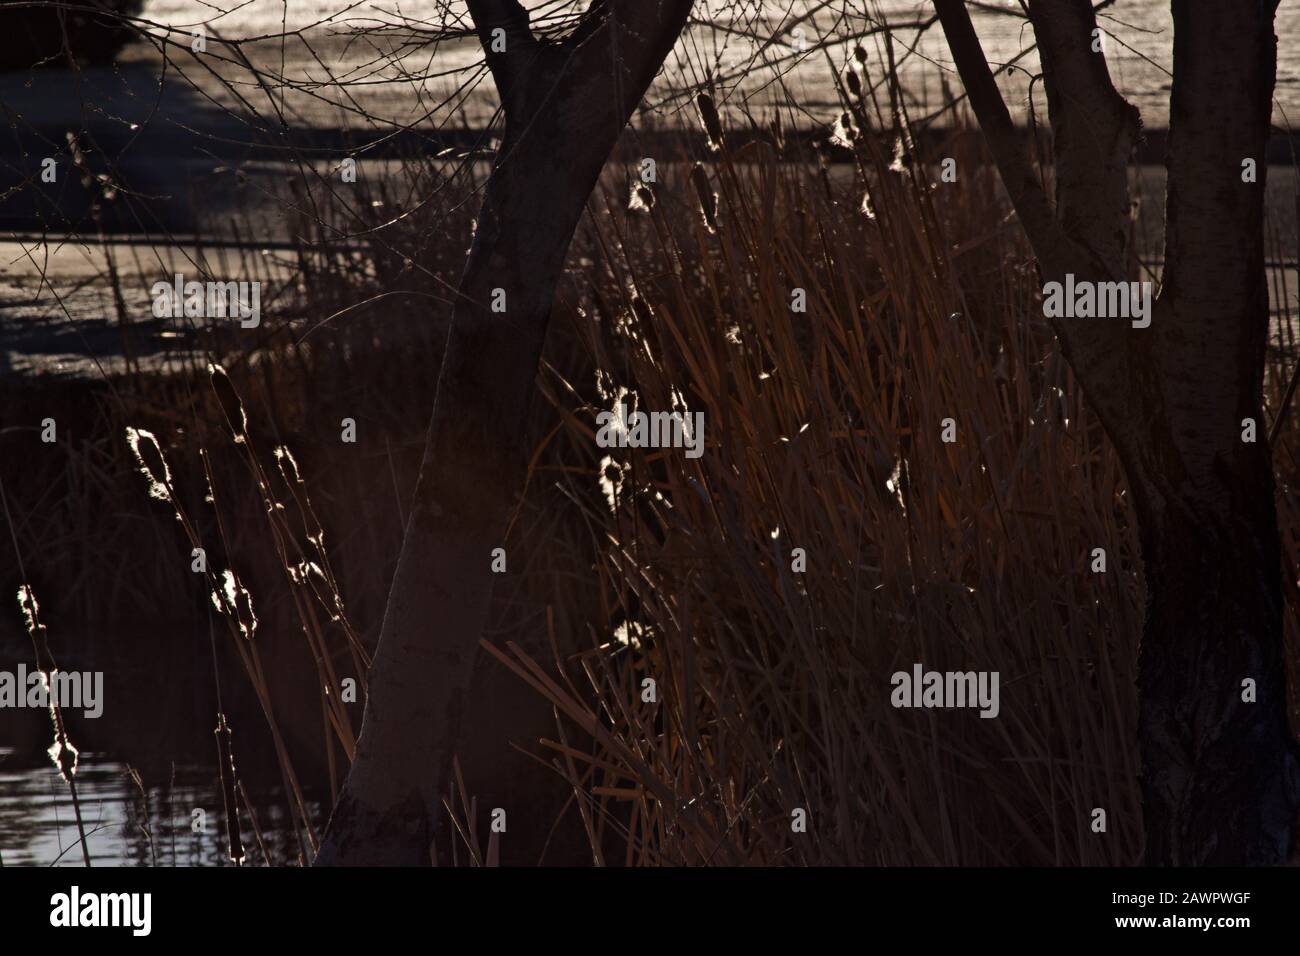 Morning Sunlight on Tree and Seed Bursting Cattail Pods, Canyon, Texas. Stock Photo